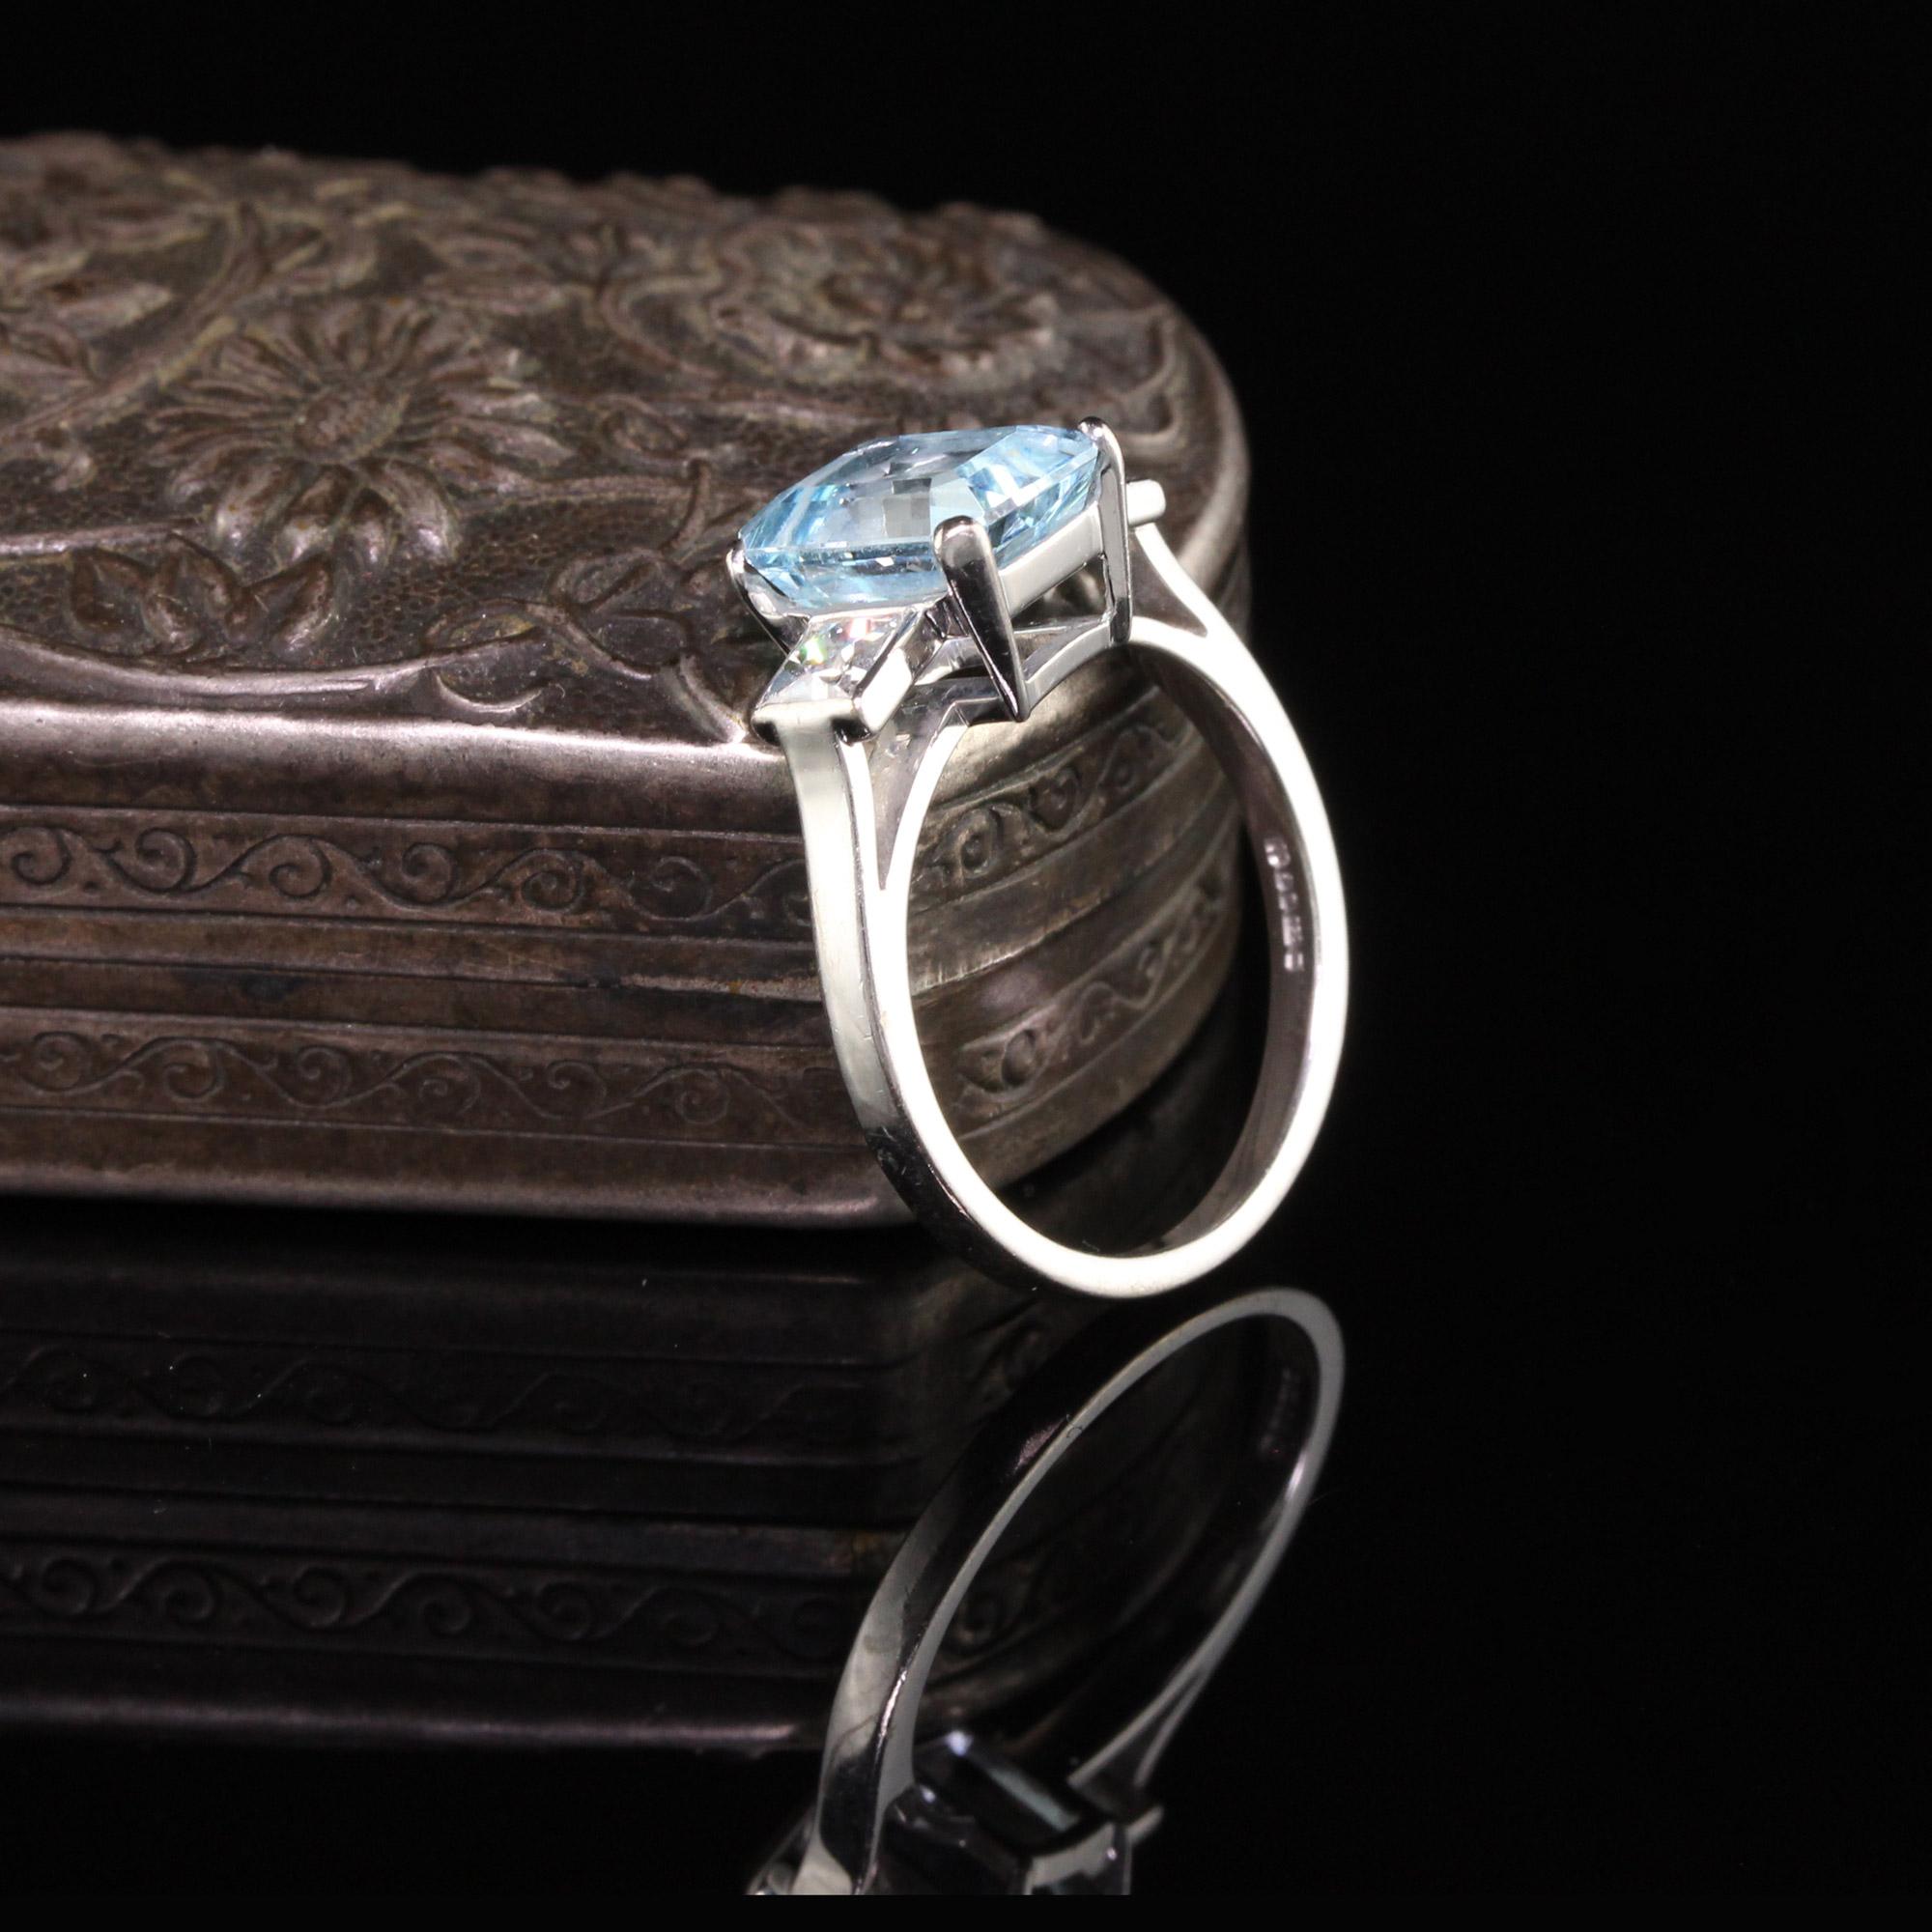 Gorgeous Antique Art Deco 18K White Gold French Cut Diamond and Aquamarine Engagement Ring. This beautiful ring features a beautiful aquamarine center with two french cut diamonds on the sides. Its a beautiful color aquamarine and very